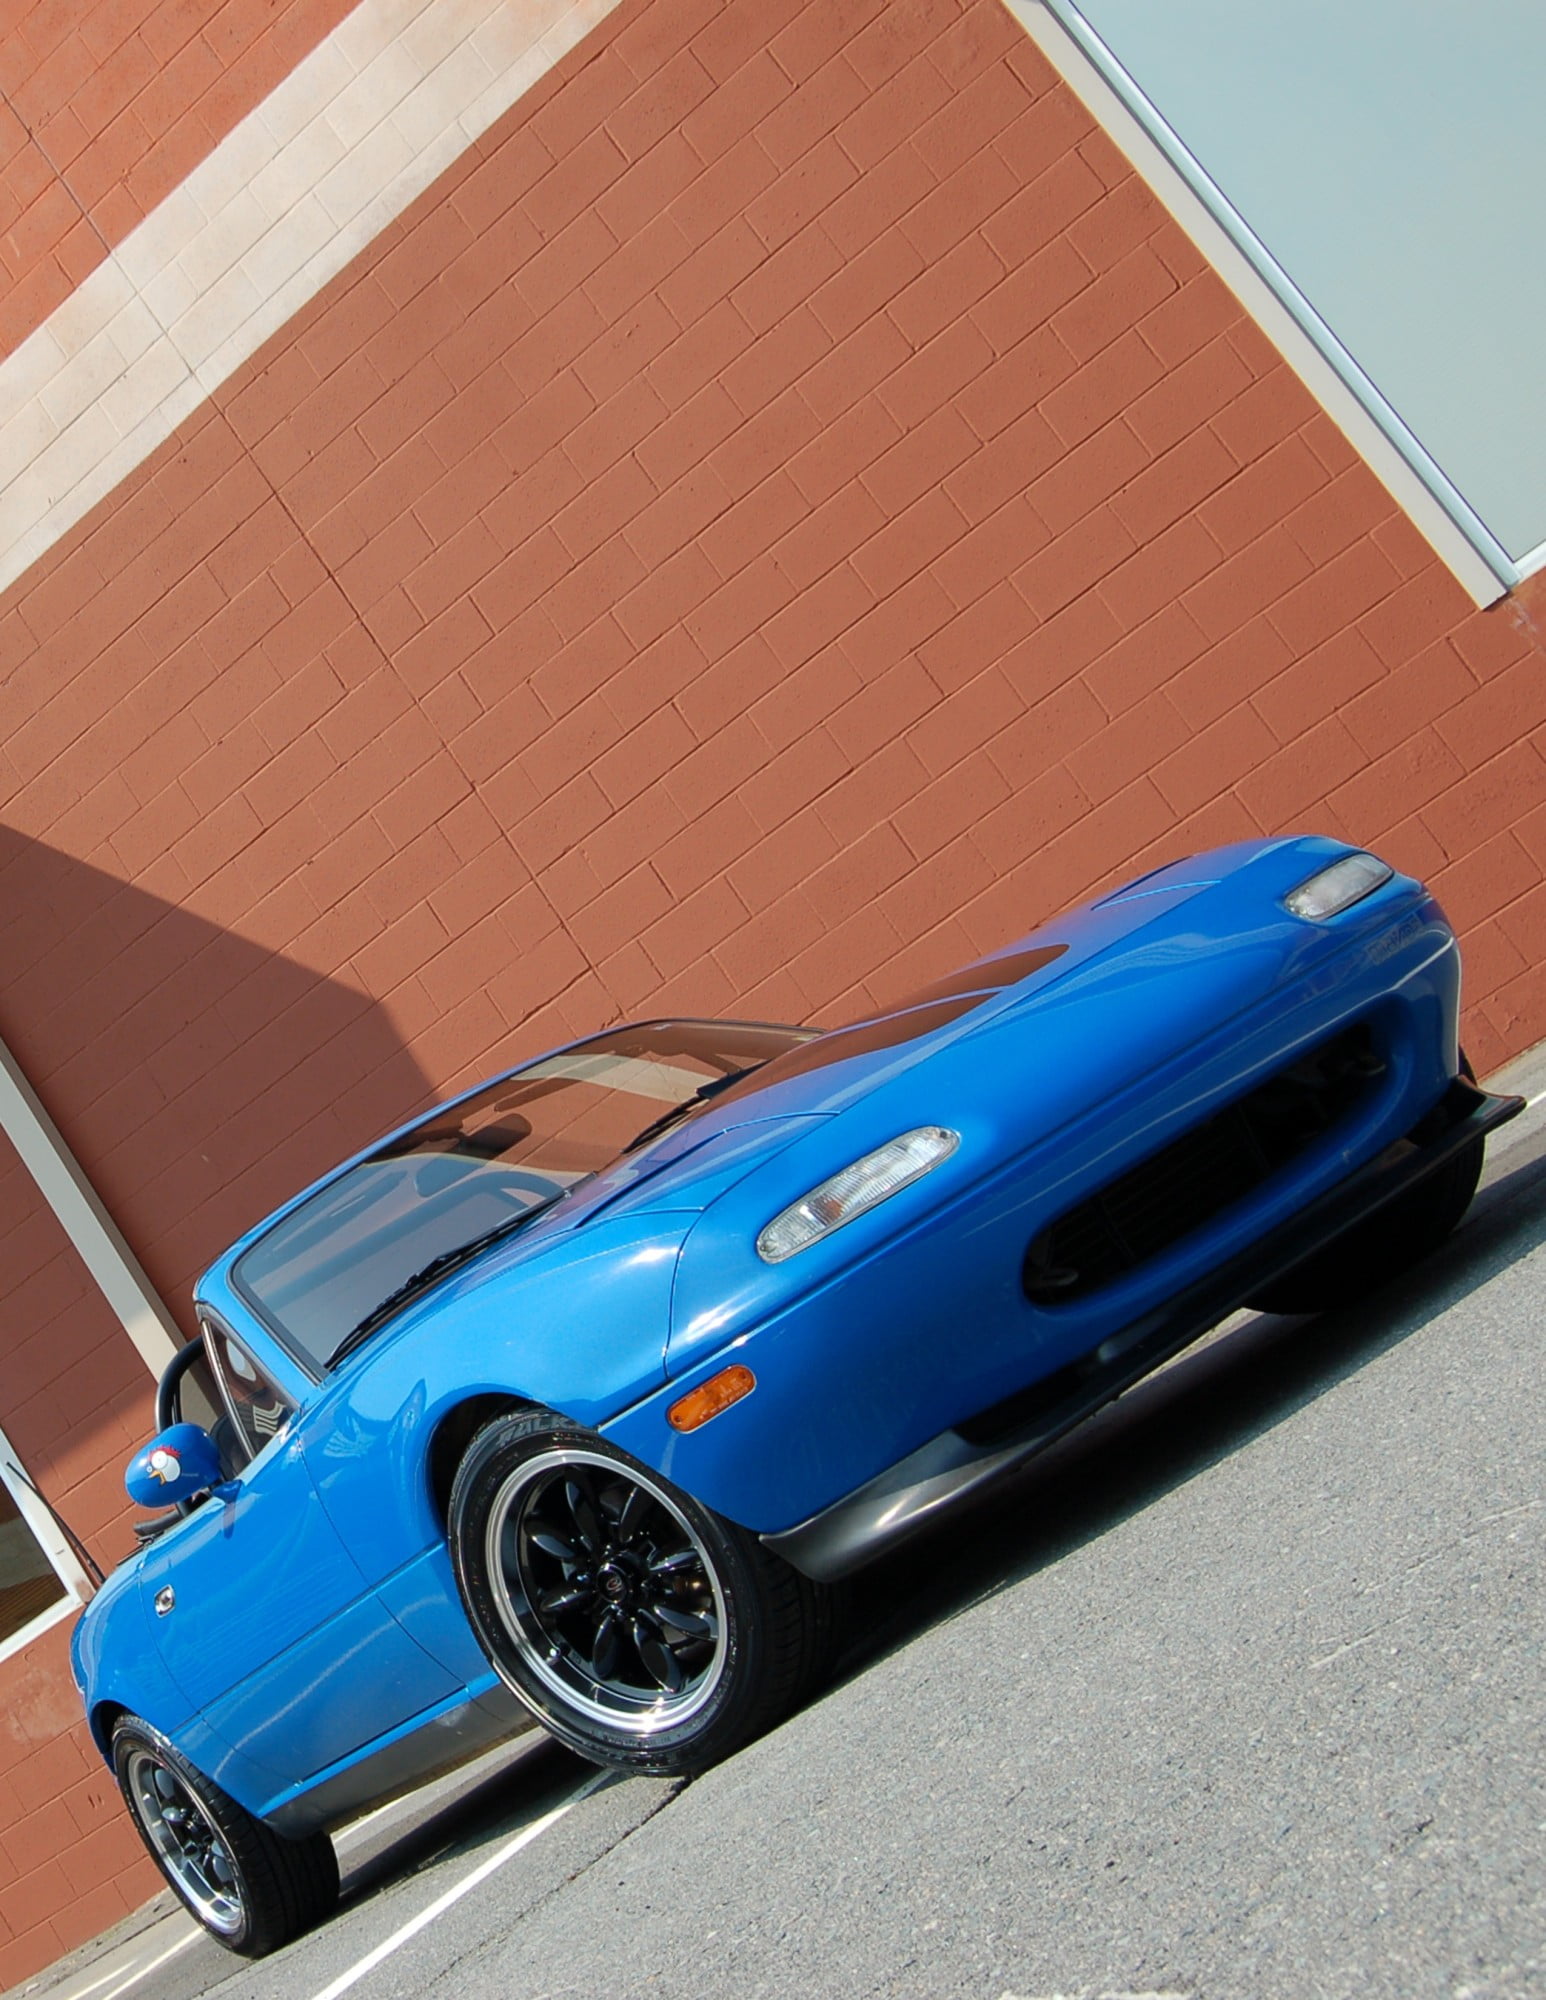 Buying a Used Mazda Miata Everything You Need to Know